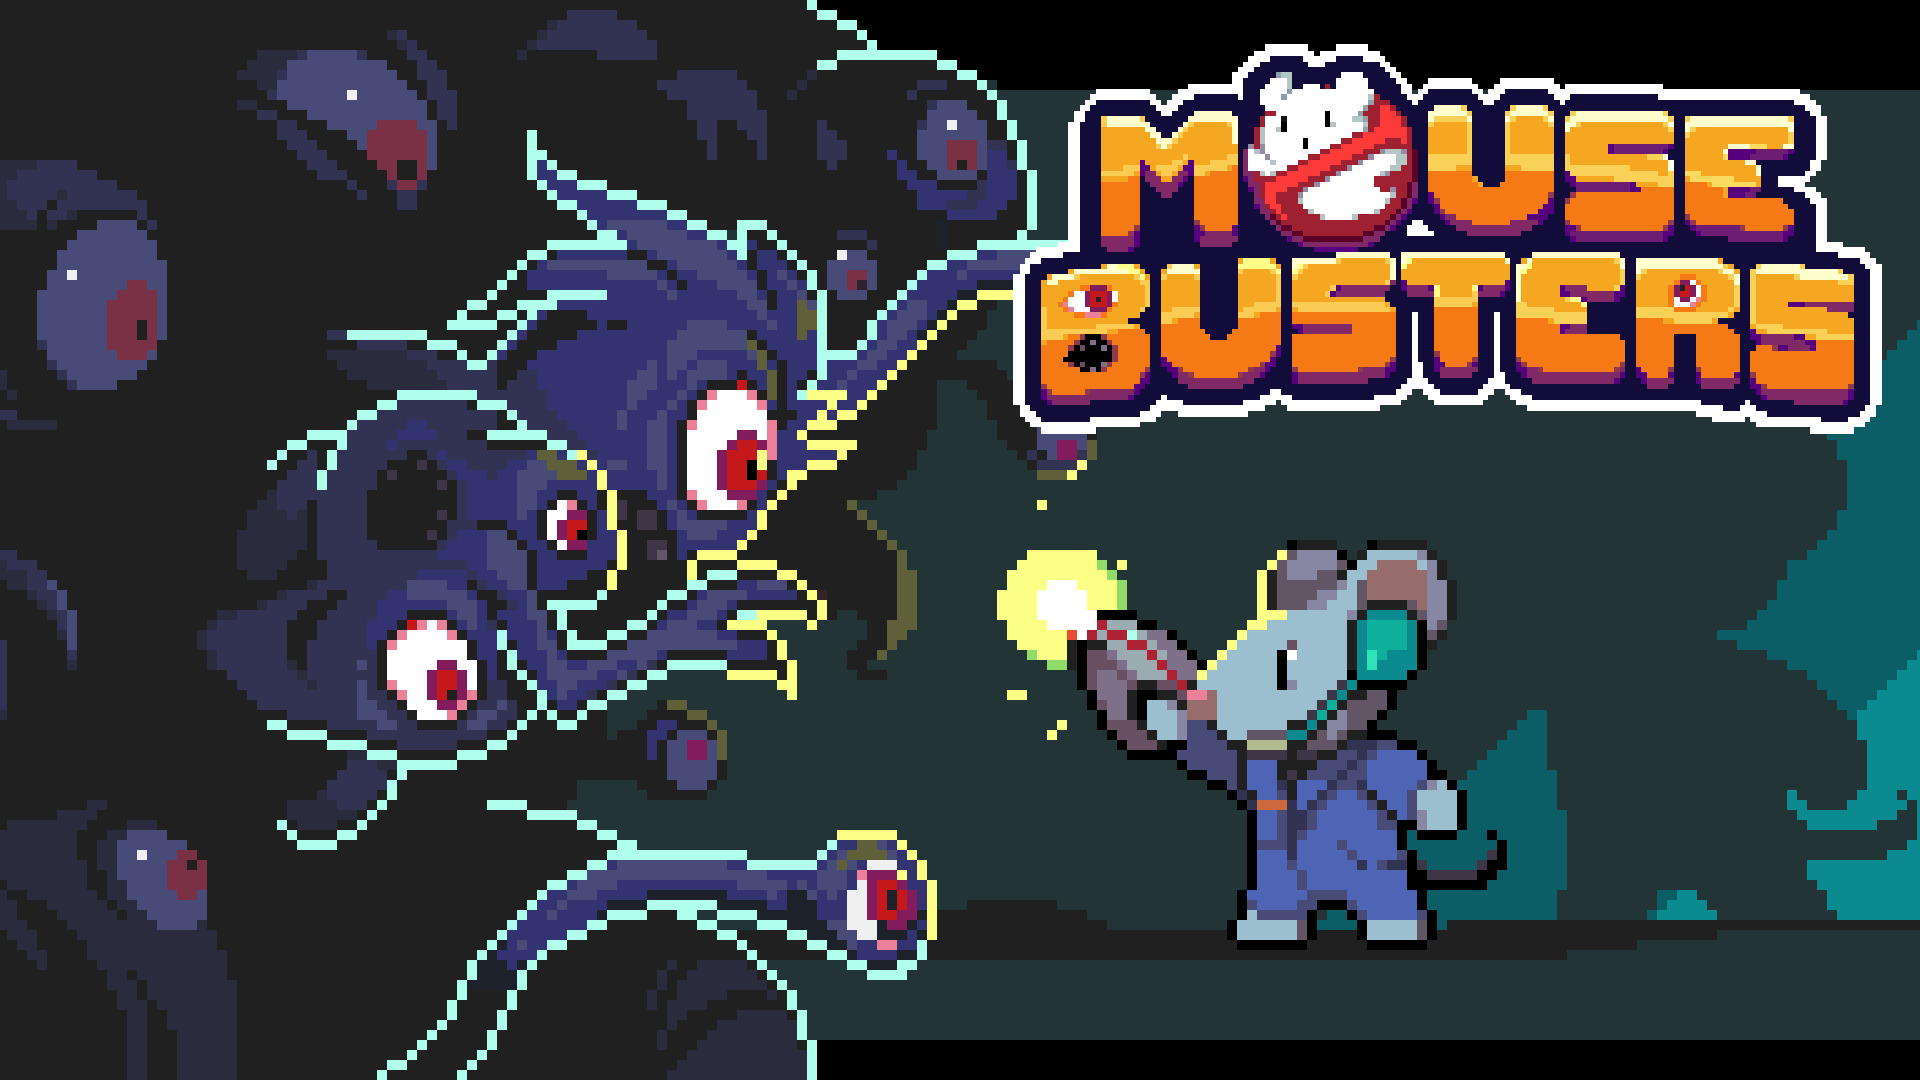 The key art for Mousebusters.